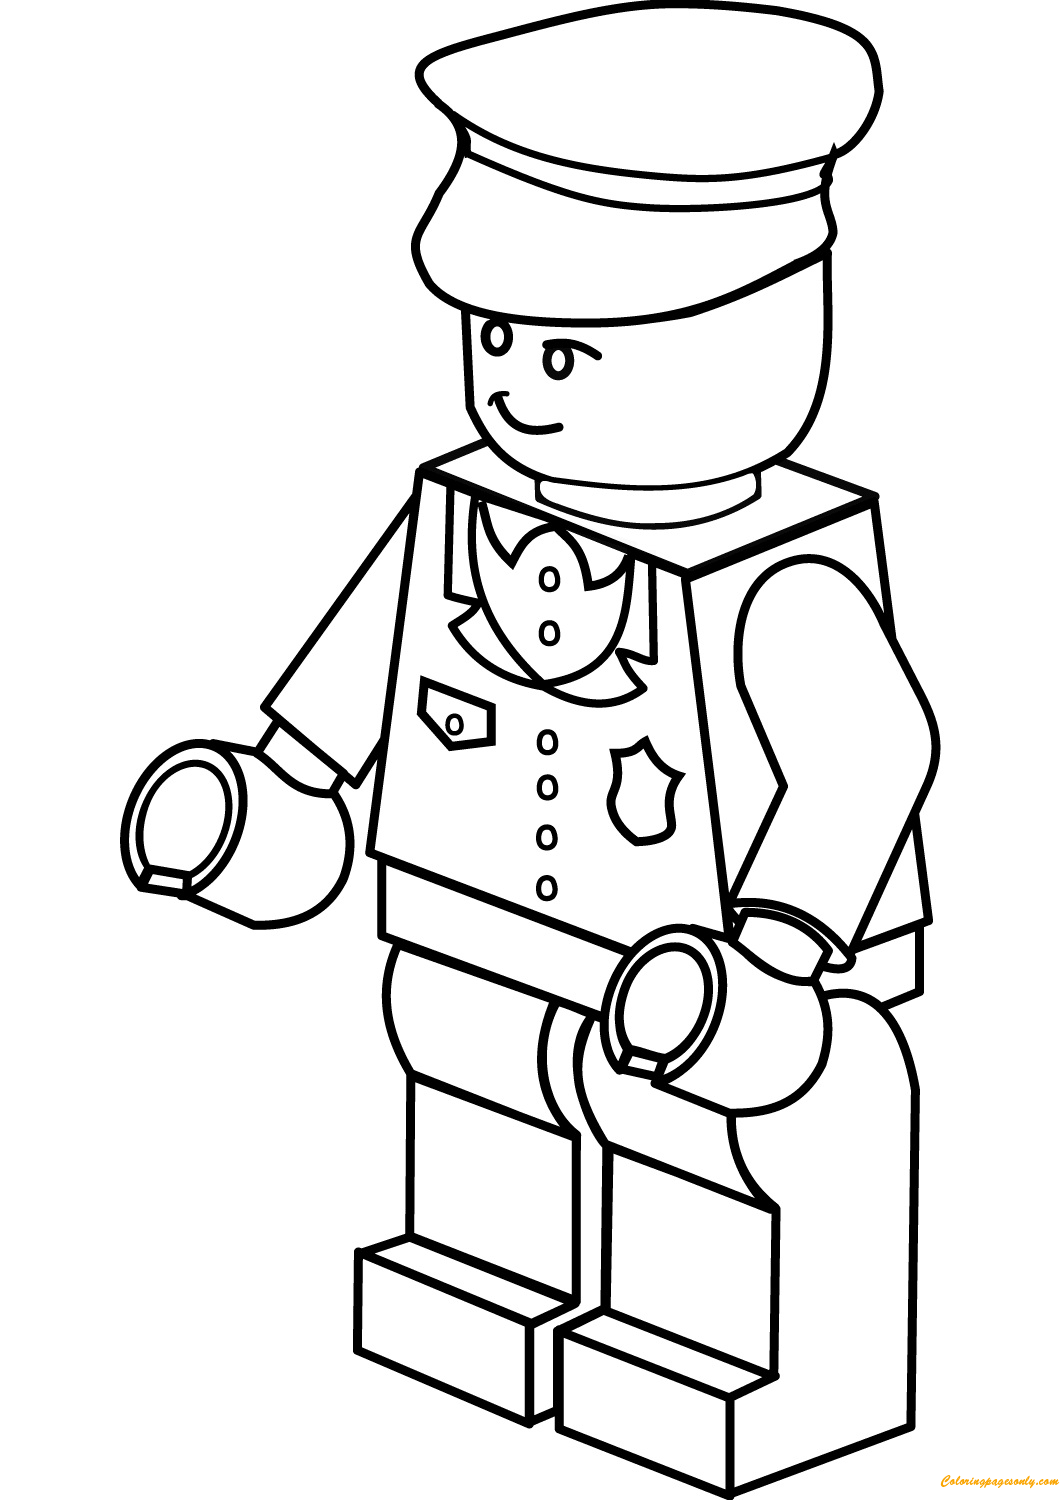 Lego Policeman Coloring Pages